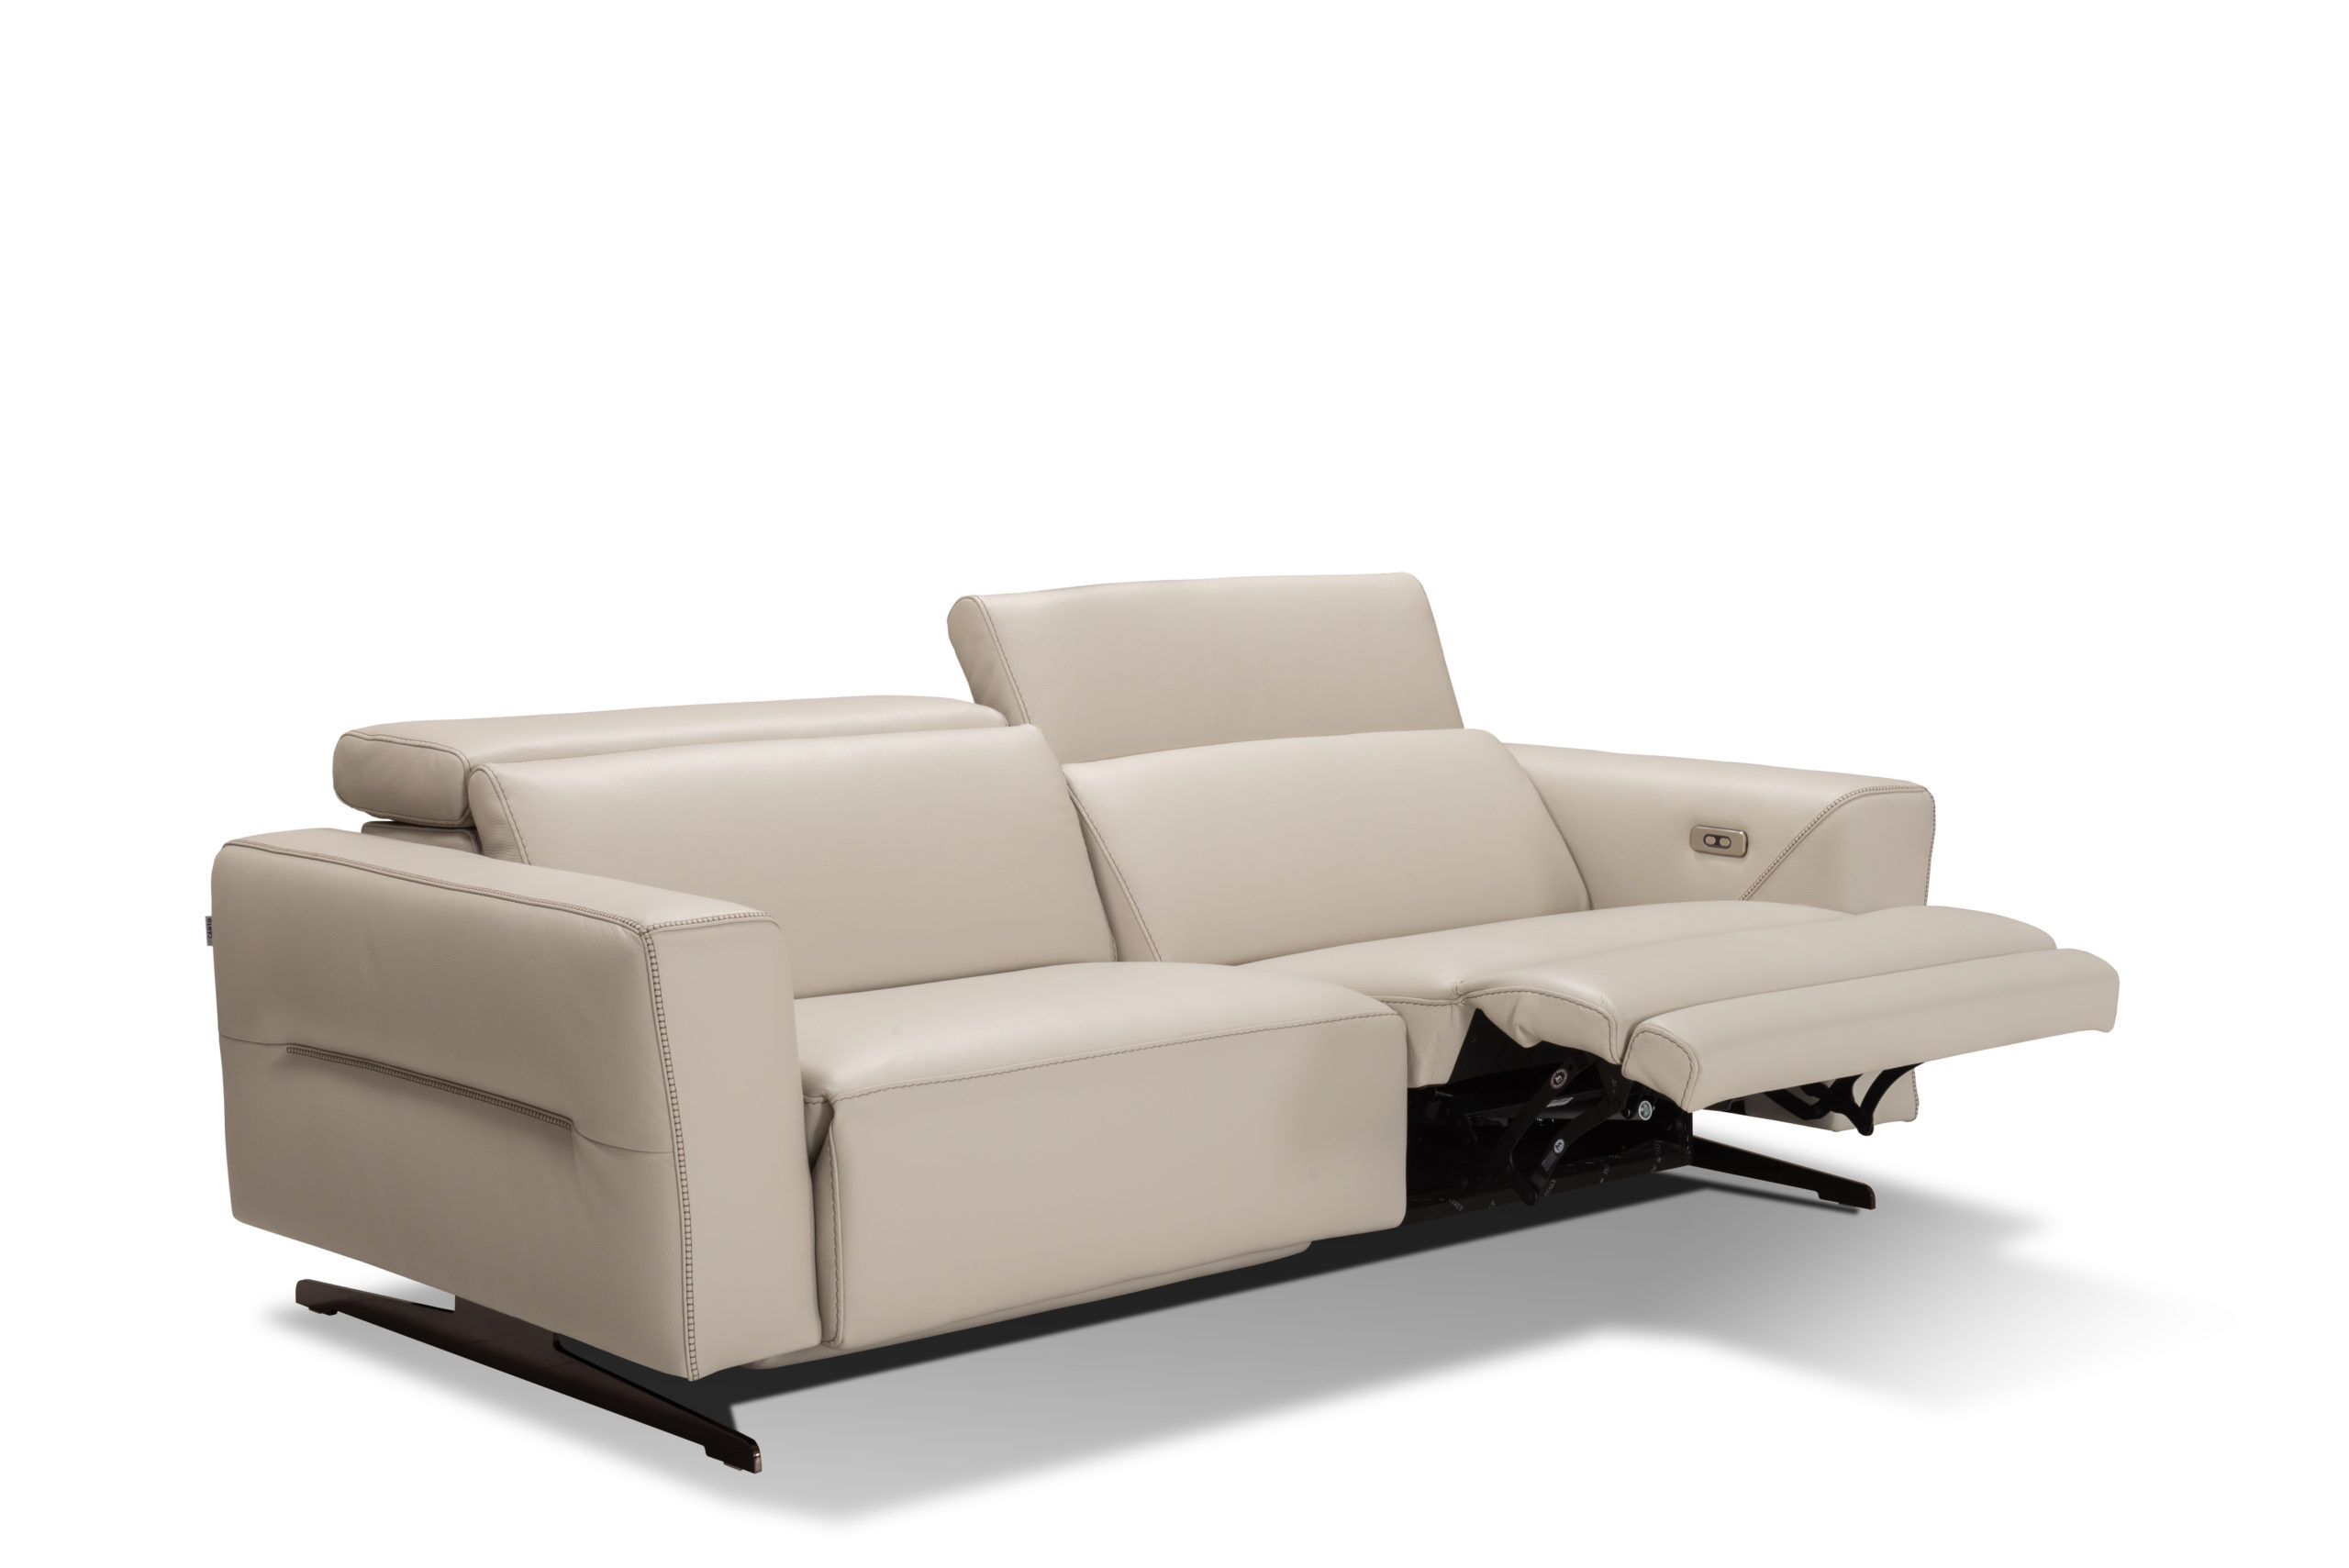 I811 Reclining Leather Sofa By Incanto, Reclining Leather Couch